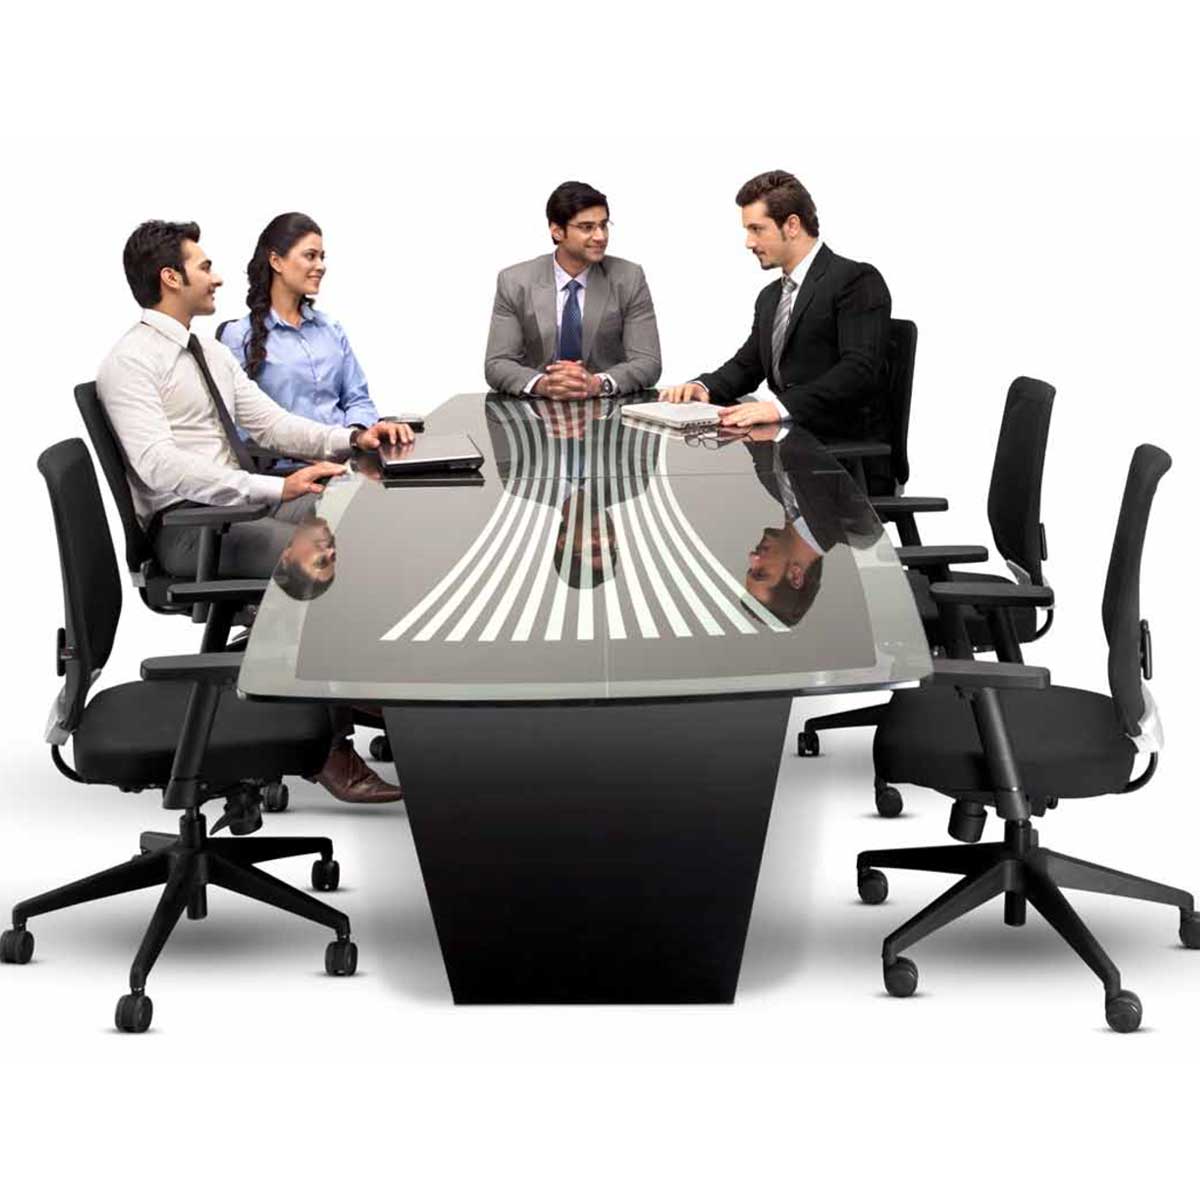 Conference table Manufacturers, Suppliers, Exporters in Delhi 